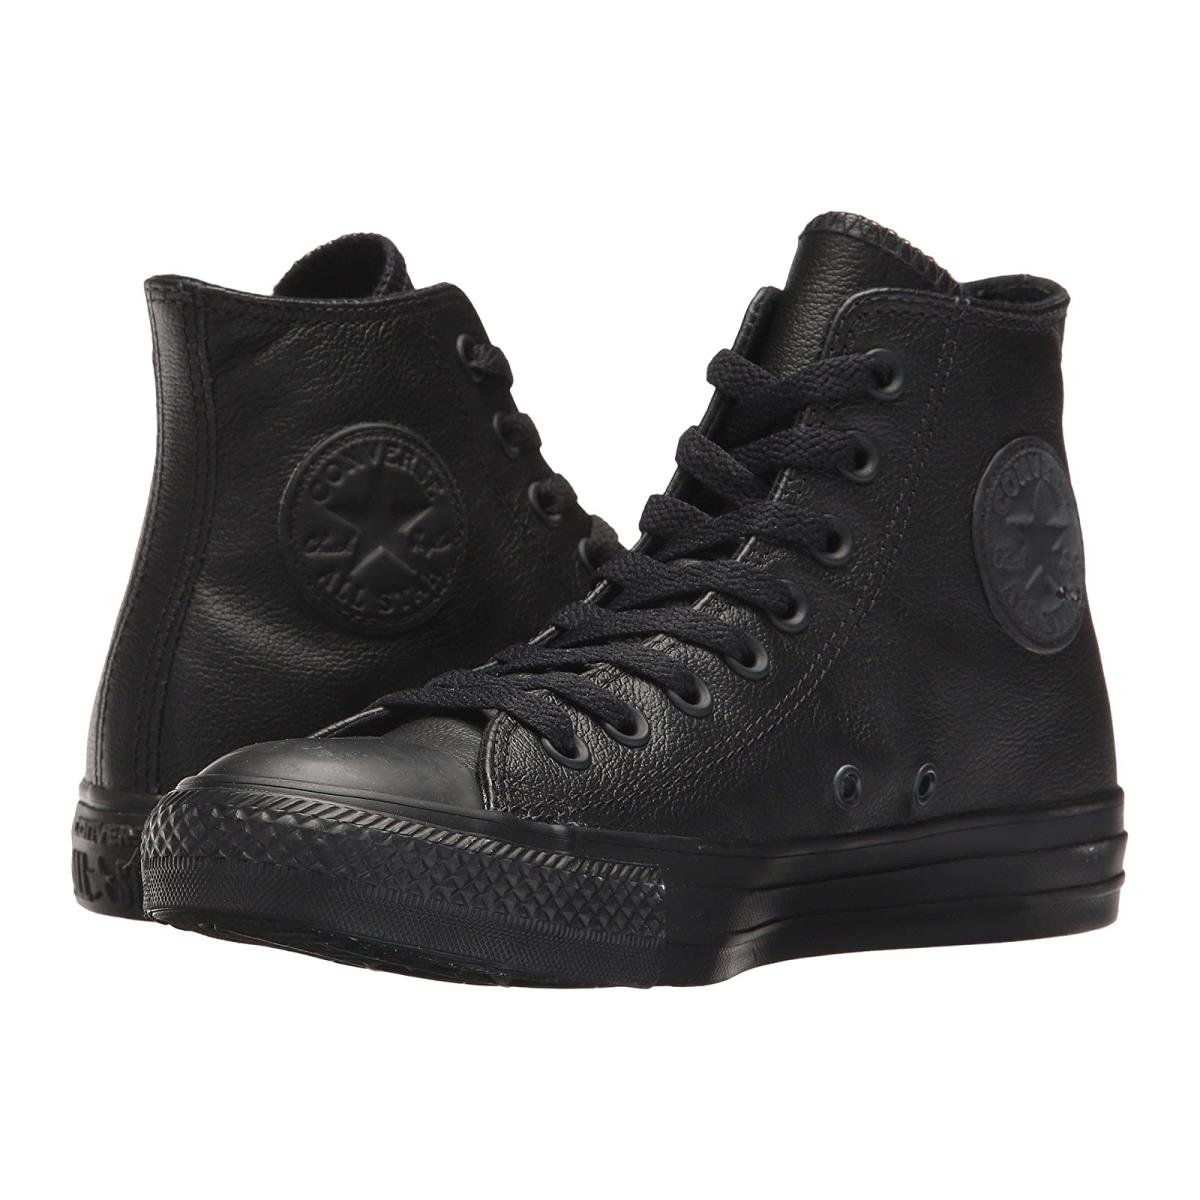 Unisex Shoes Converse Chuck Taylor All Star Leather Hi Black Mono Leather